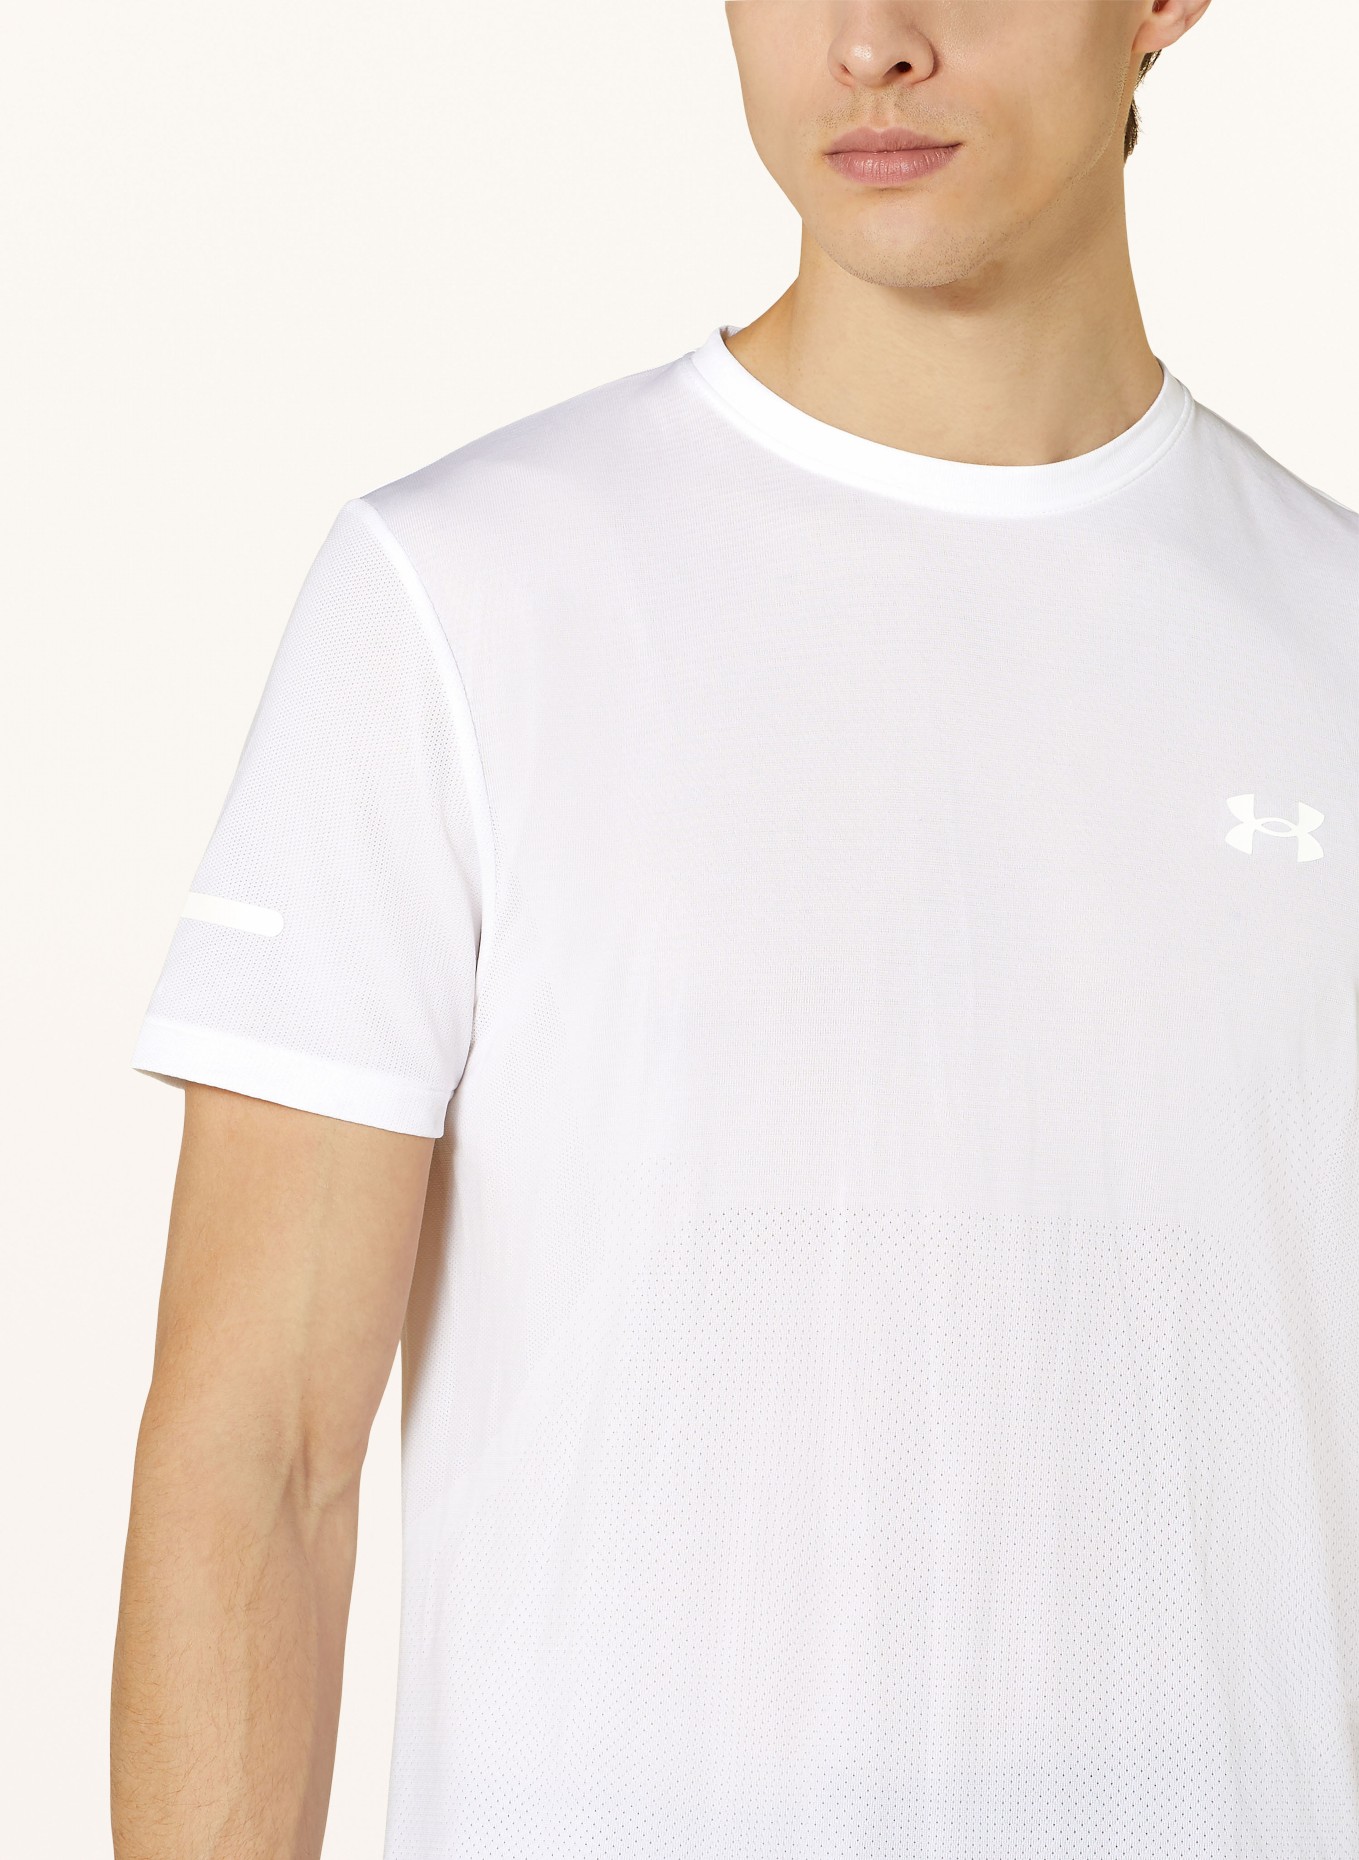 UNDER ARMOUR Running shirt UA SEAMLESS STRIDE, Color: WHITE (Image 4)